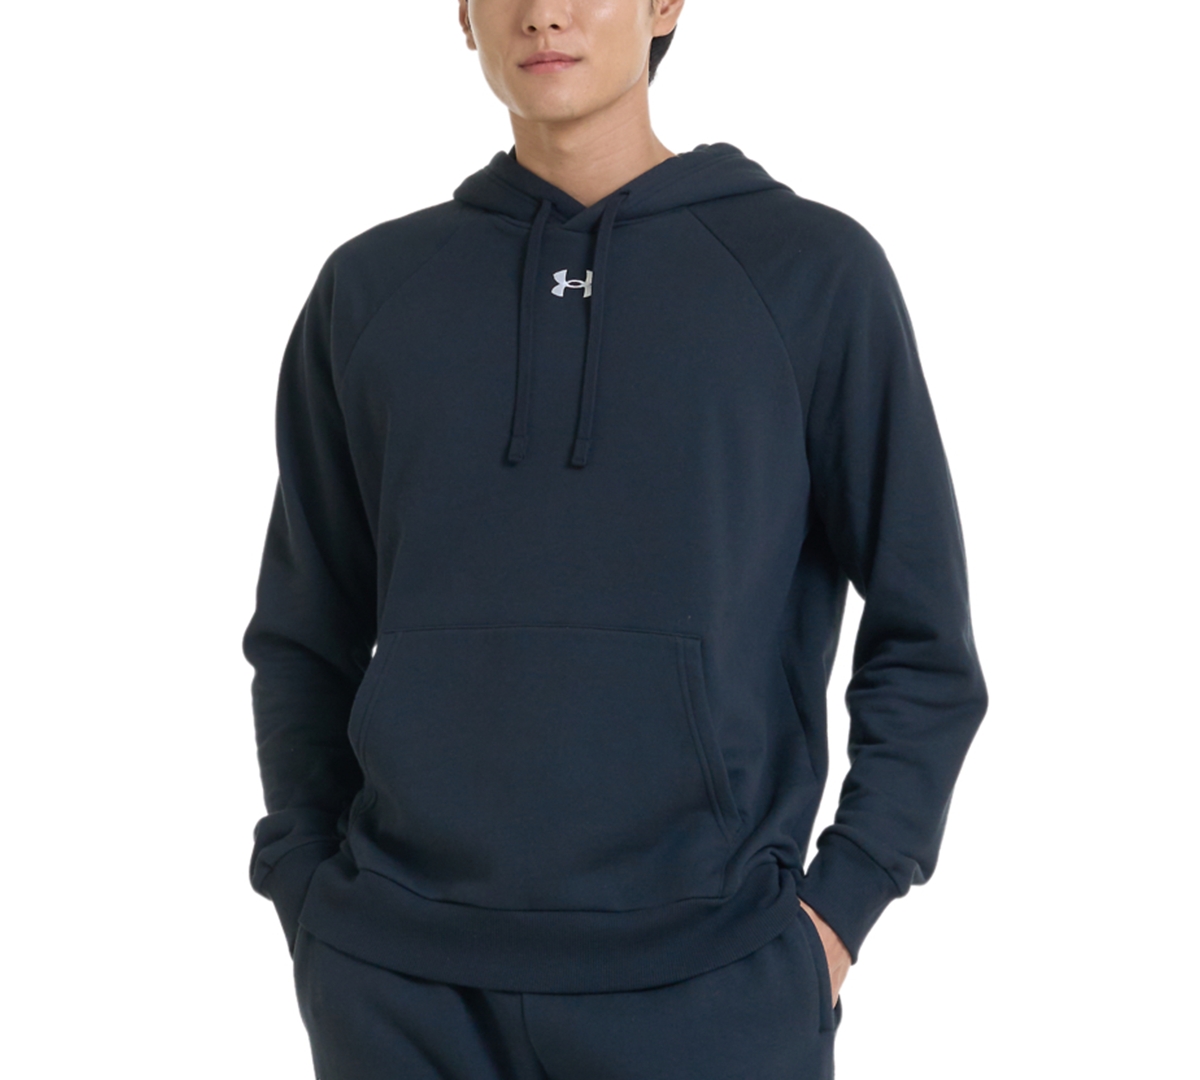 Under Armour Men's Rival Logo Embroidered Fleece Hoodie In Black,wht